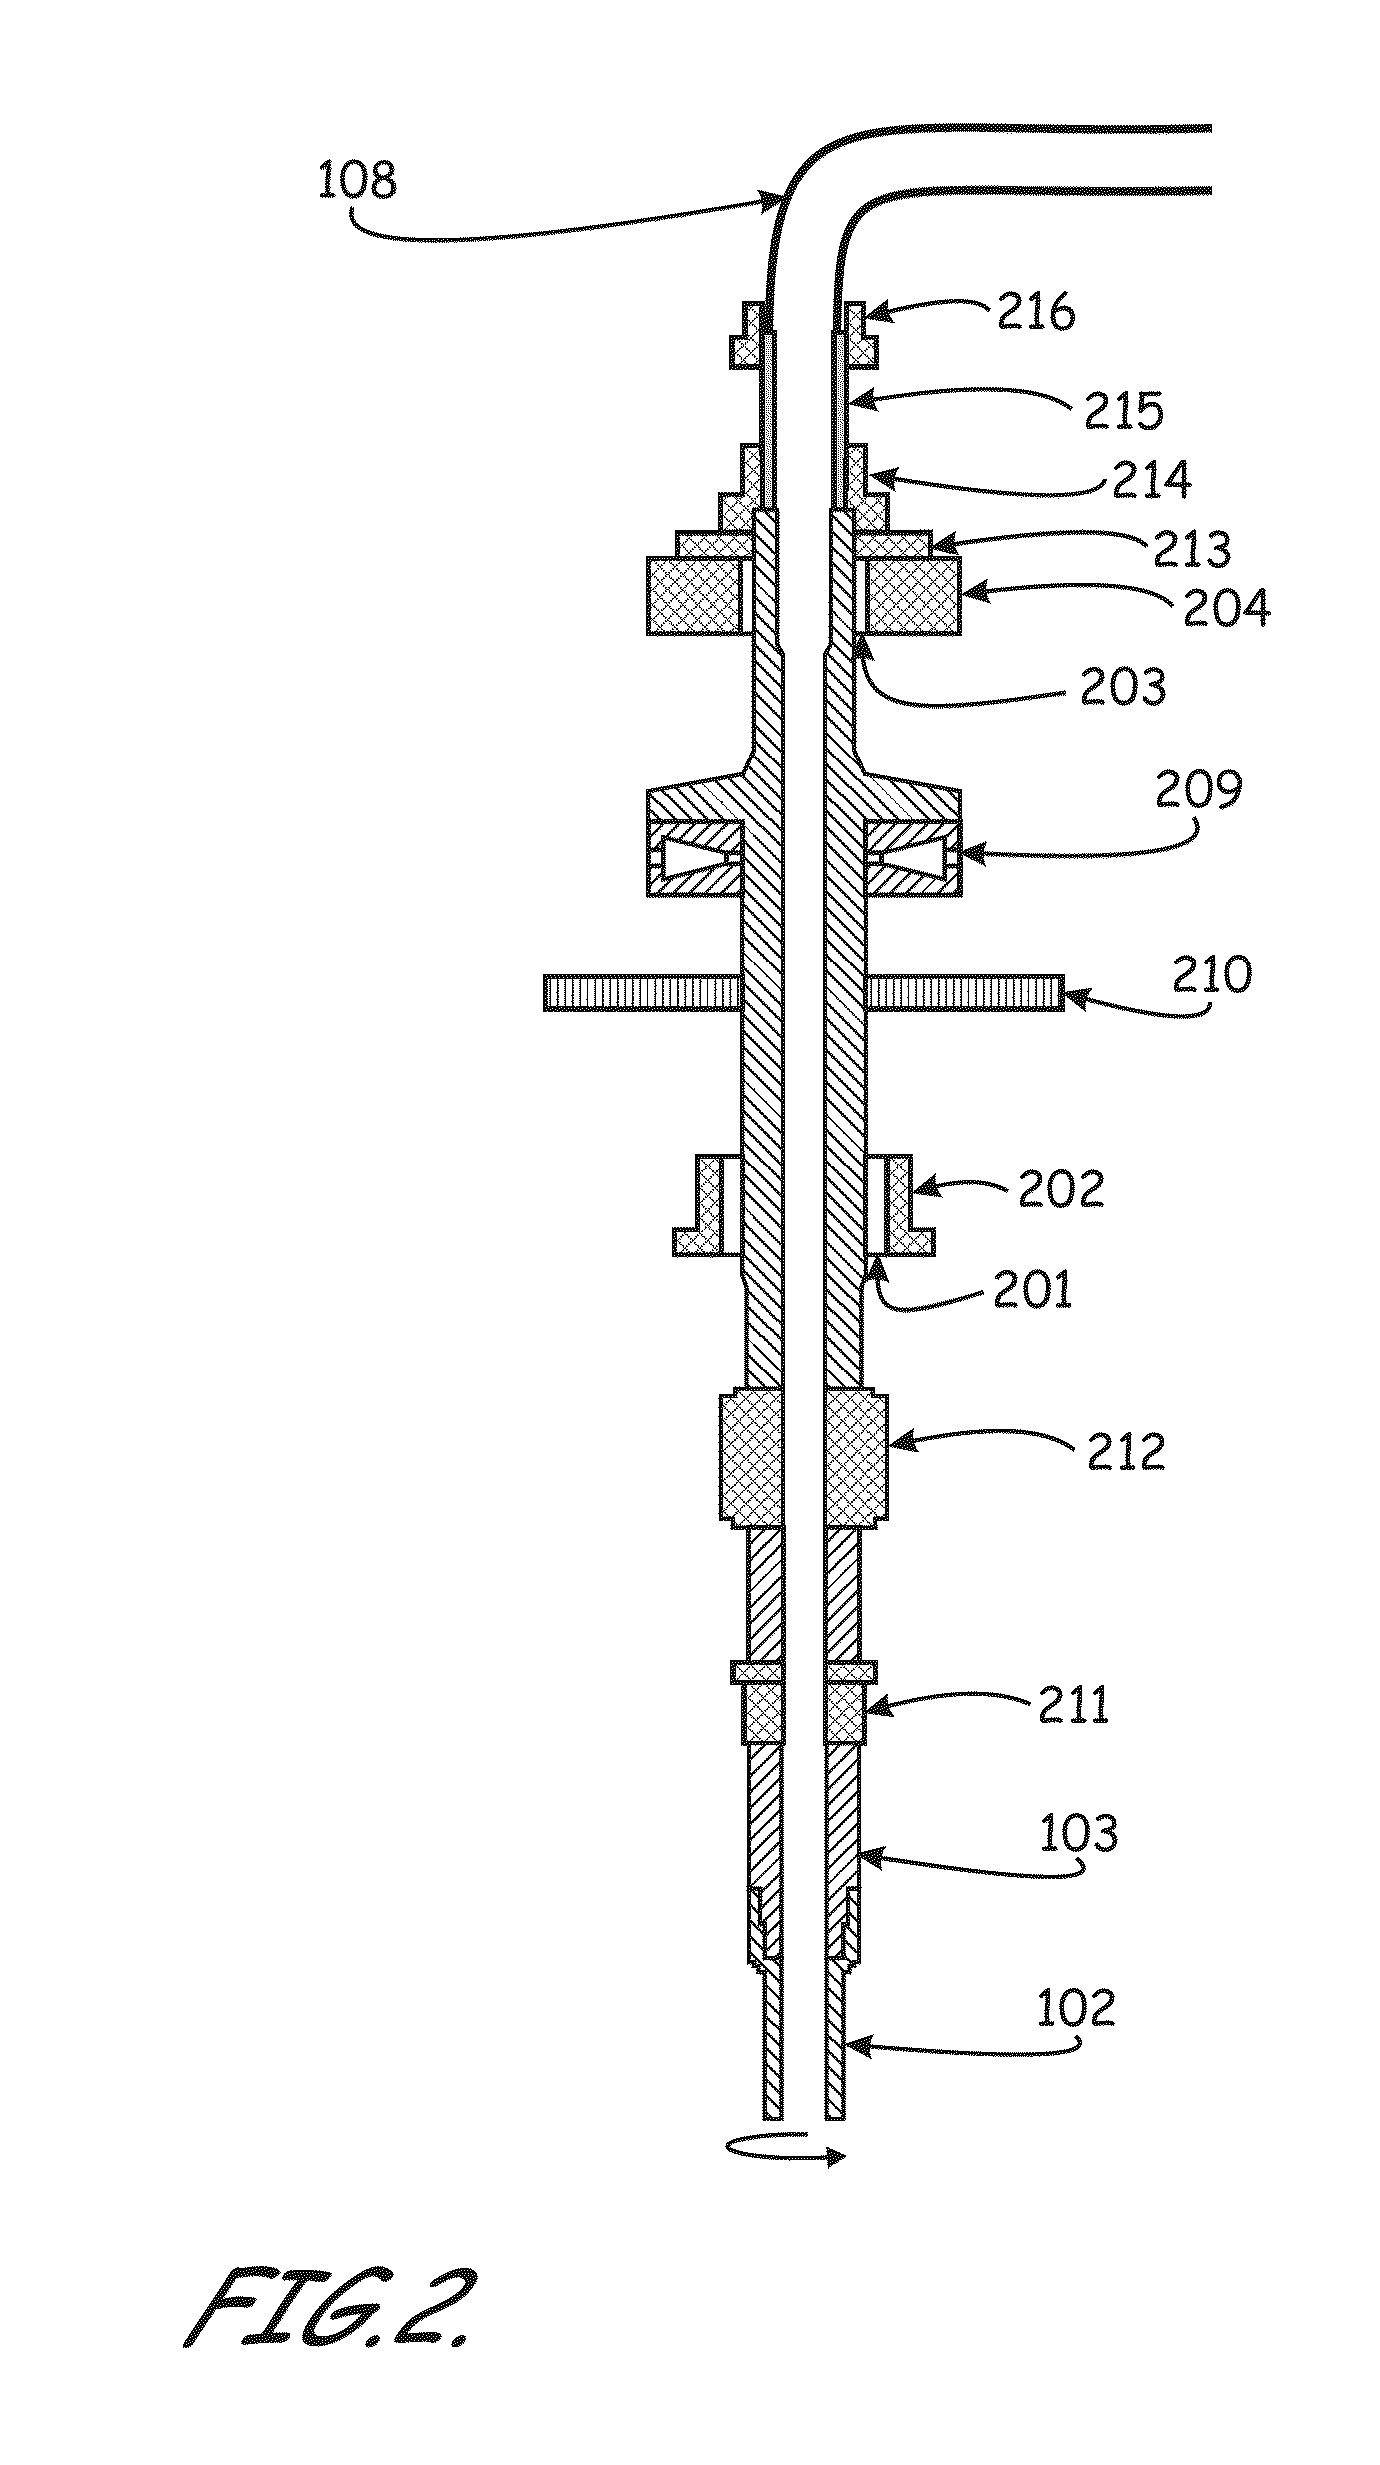 Methods for evaluating rock properties while drilling using drilling rig-mounted acoustic sensors